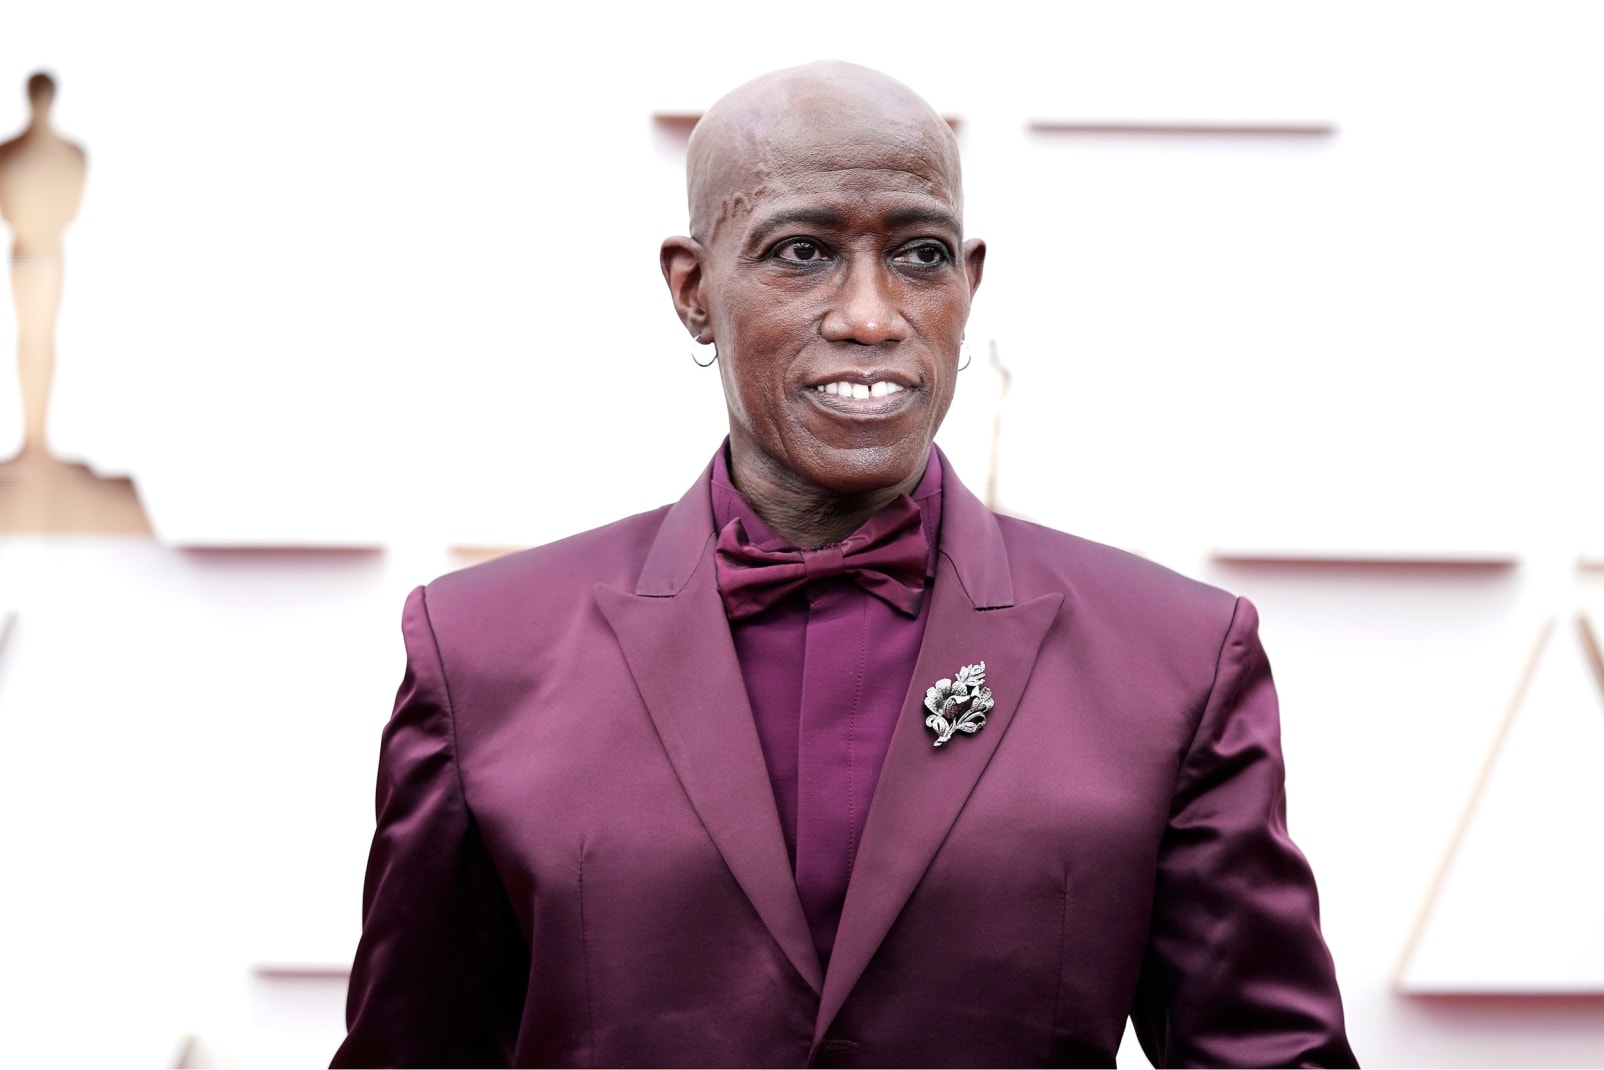 "Coming 2 America" actor Wesley Snipes in a custom Givenchy maroon look paired with silver hoop earrings.